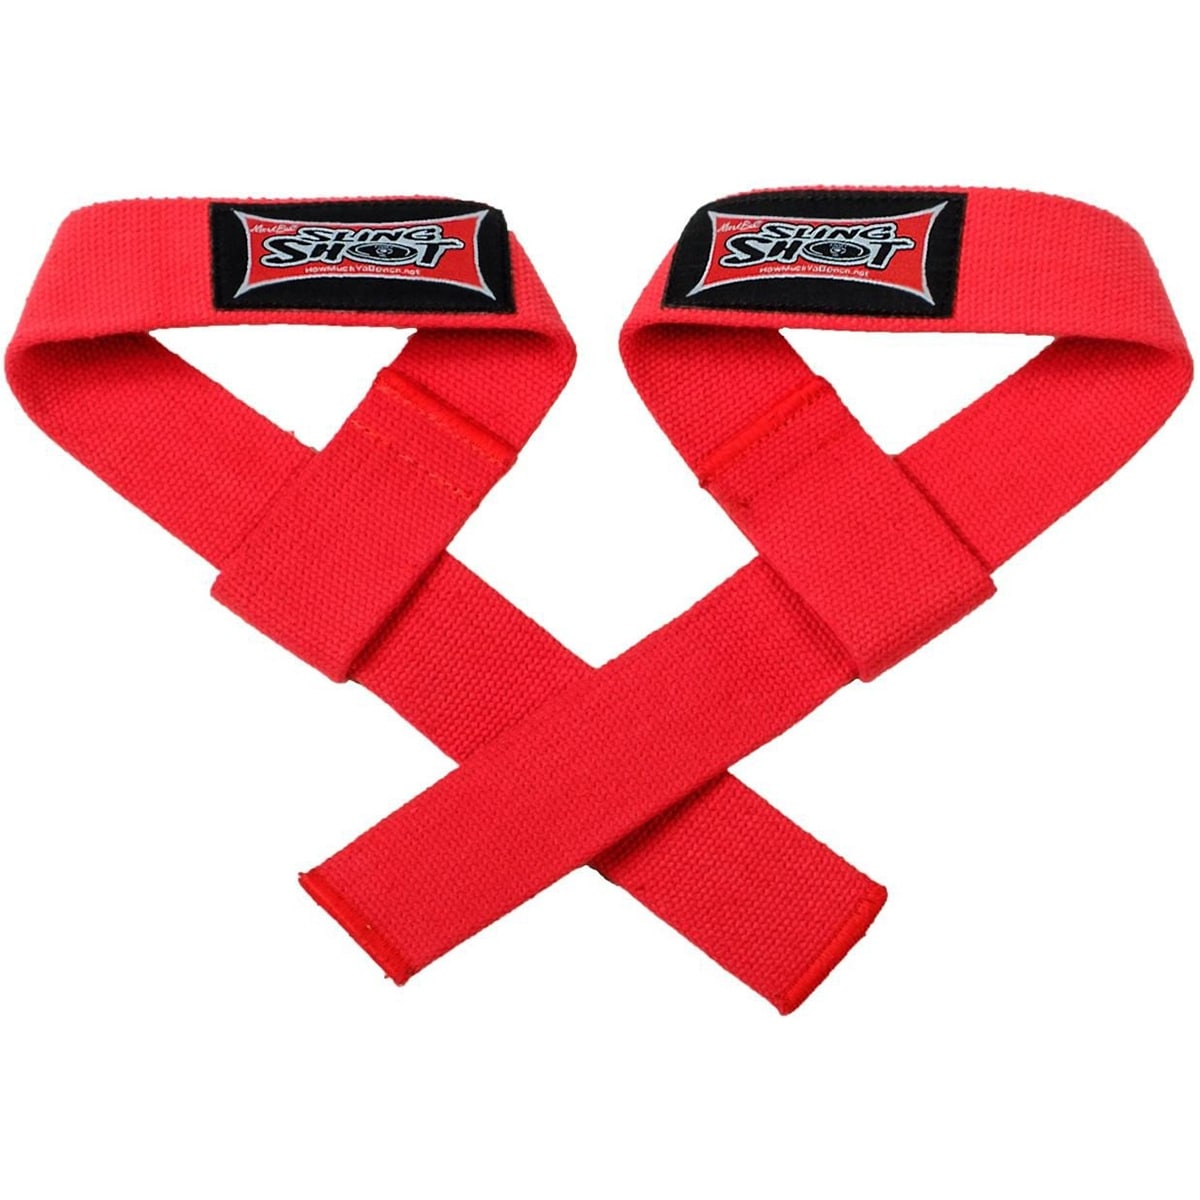 Sling Shot Super Heavy Duty Weight Lifting Straps by Mark Bell 2" wide 25" long 